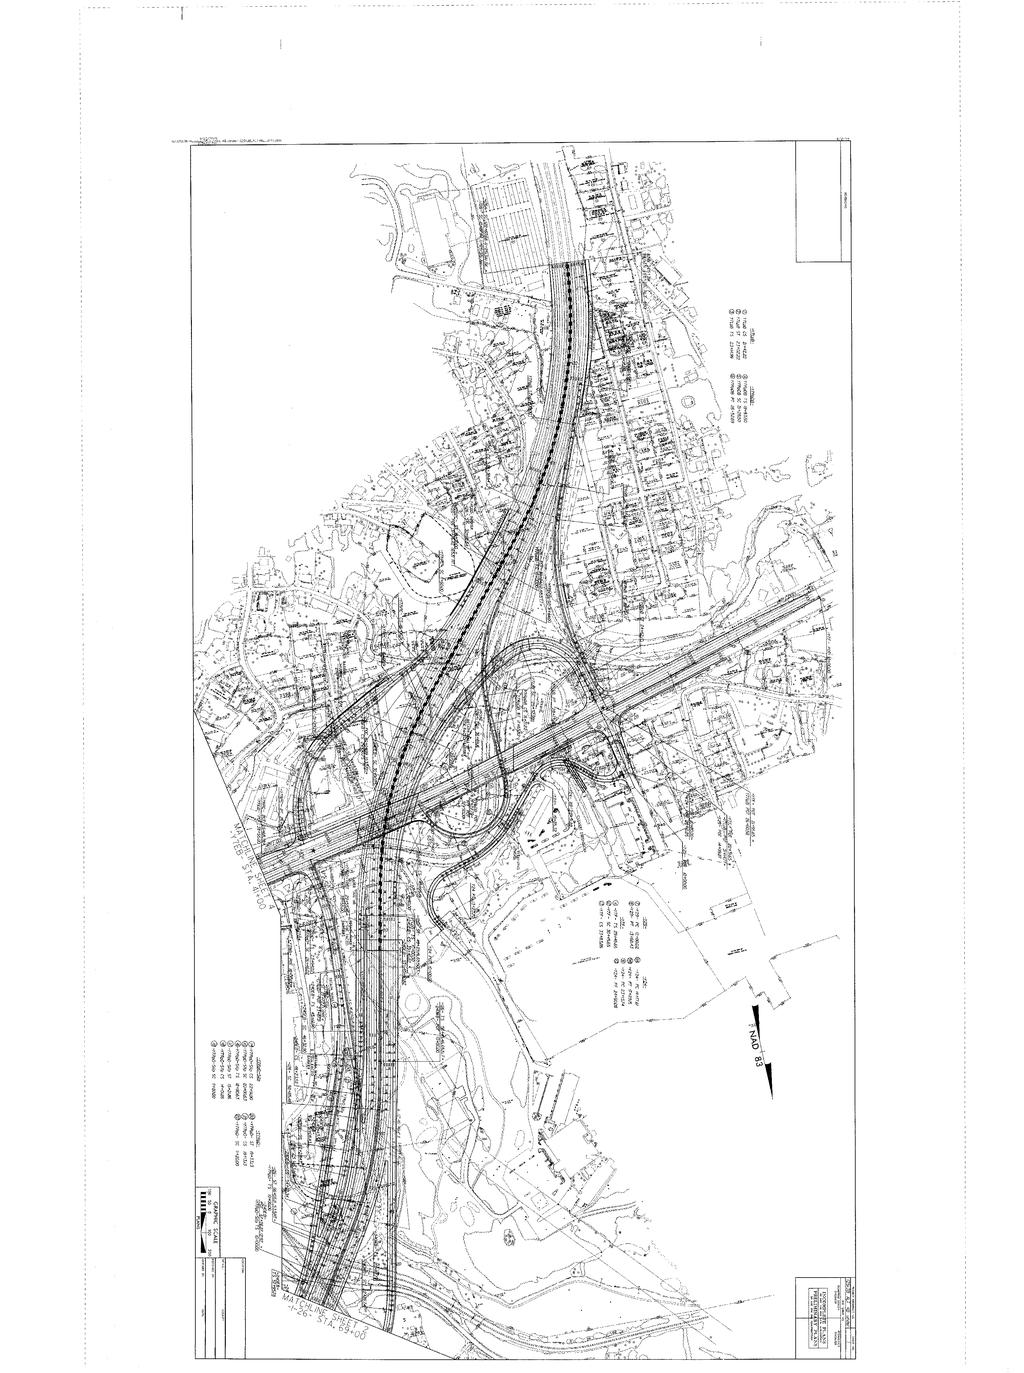 ADC review and analysis of CDOT drawing (study area 2, 2009) Smith Mill Creek overall corridor does not allow for urban development Smith Mill Creek is further culverted, when it should be restored